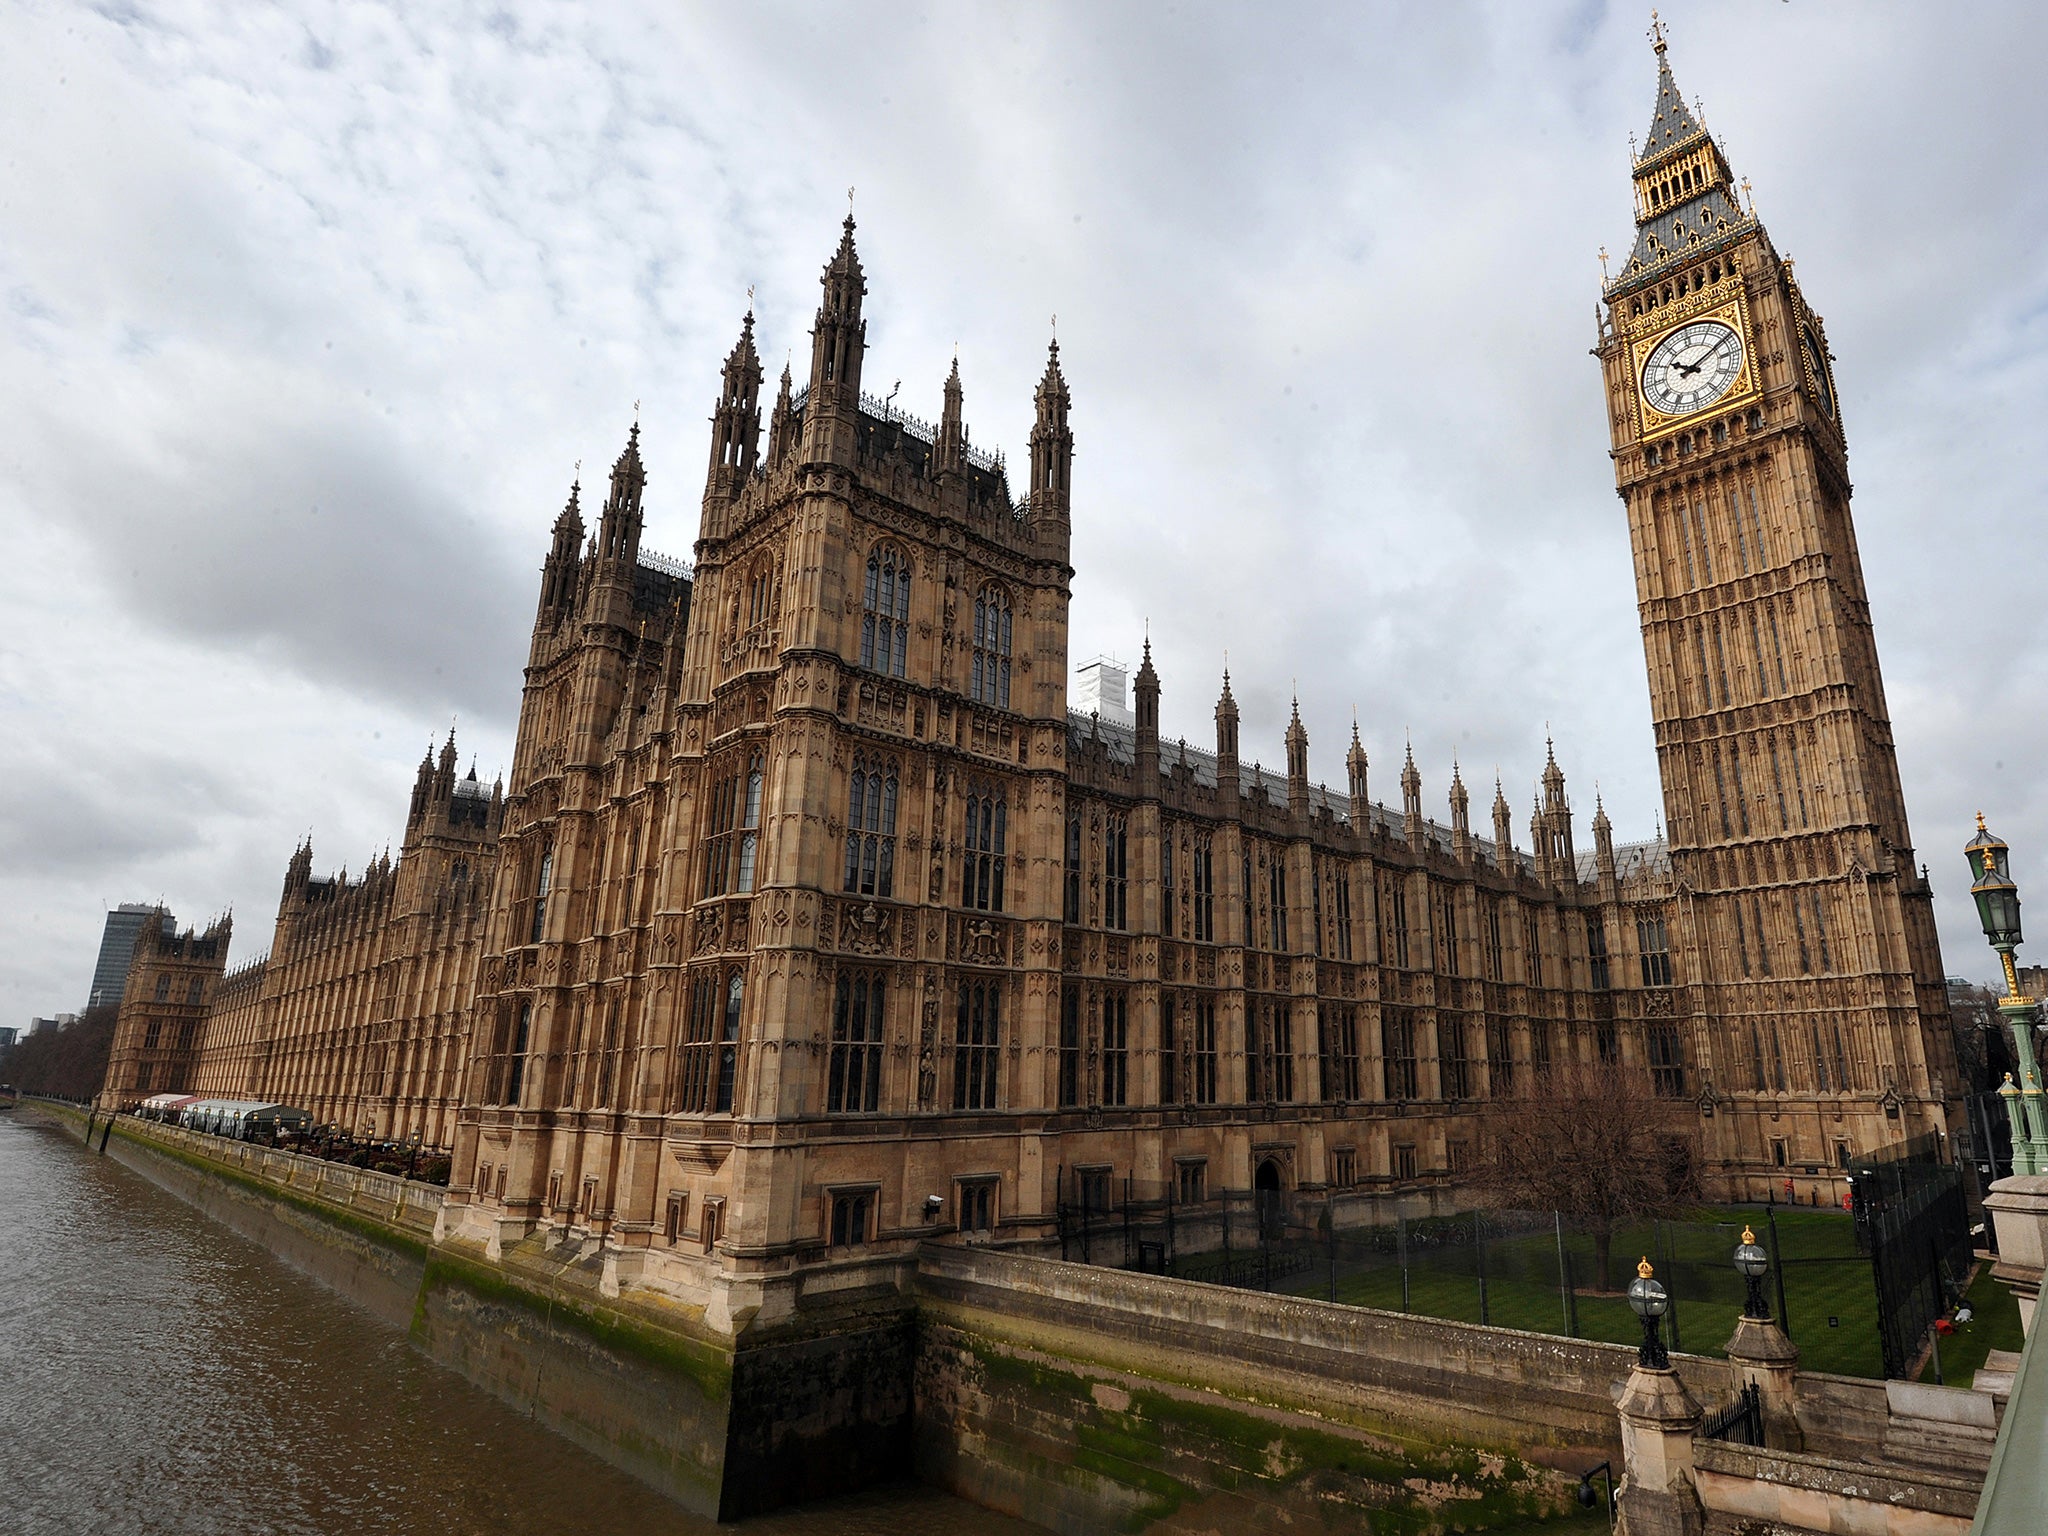 Several investigations and inquiries continue into alleged historical child abuse involving MPs